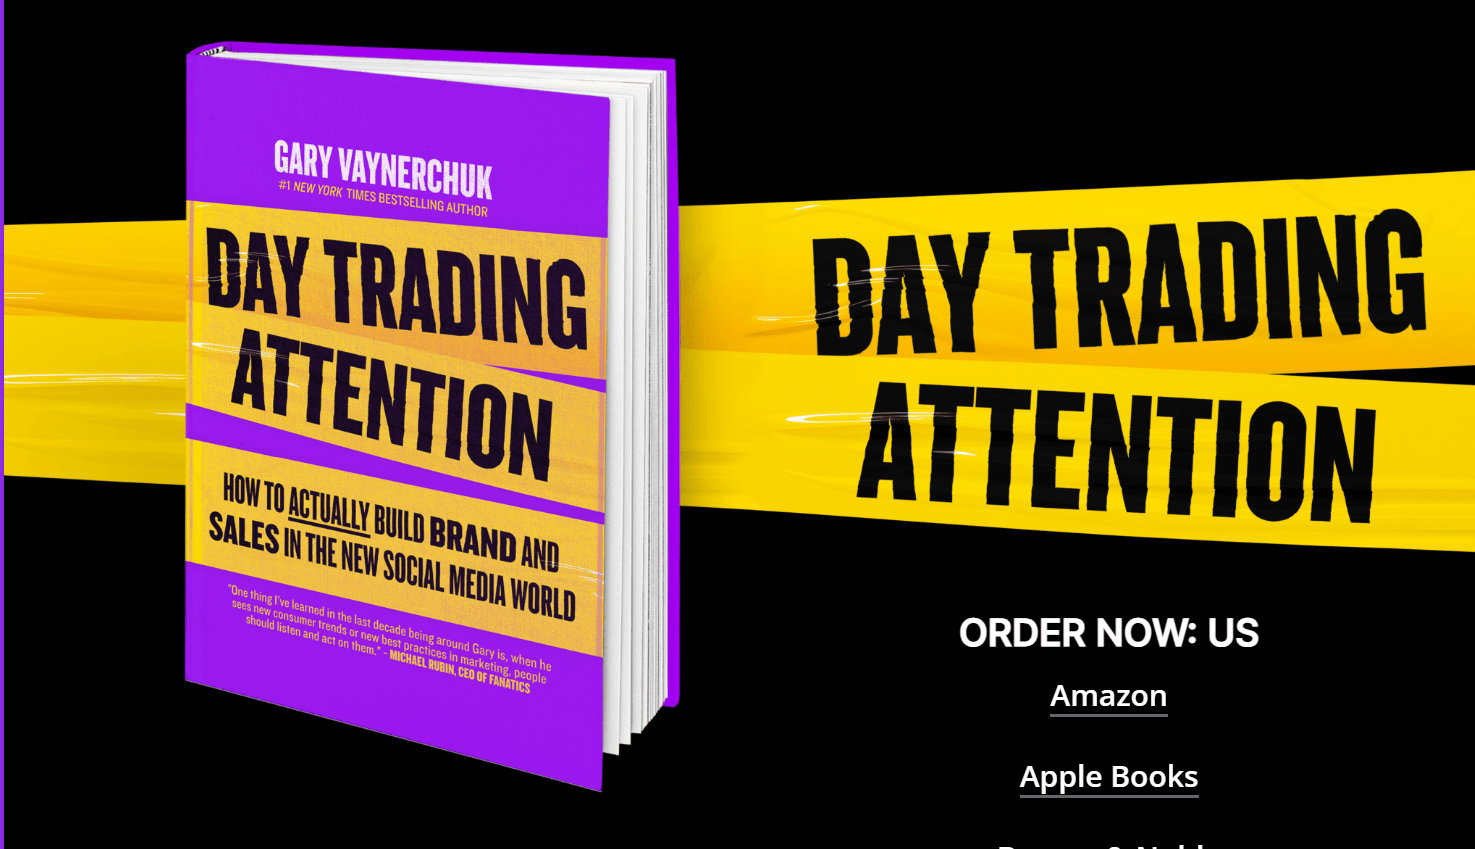 Day trading attention book review